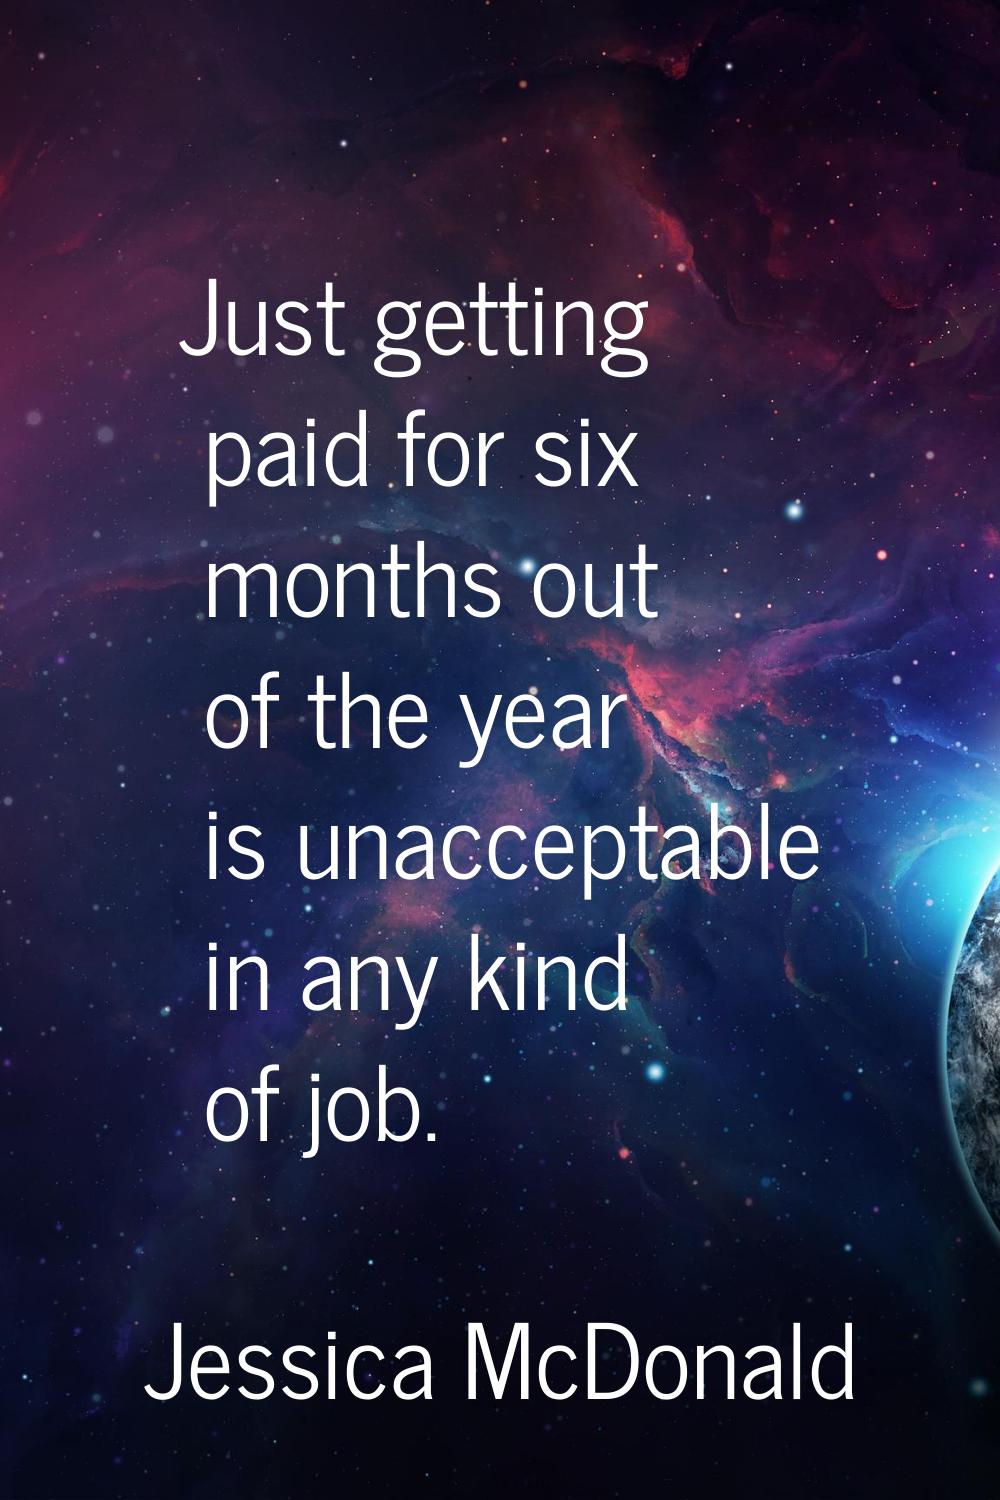 Just getting paid for six months out of the year is unacceptable in any kind of job.